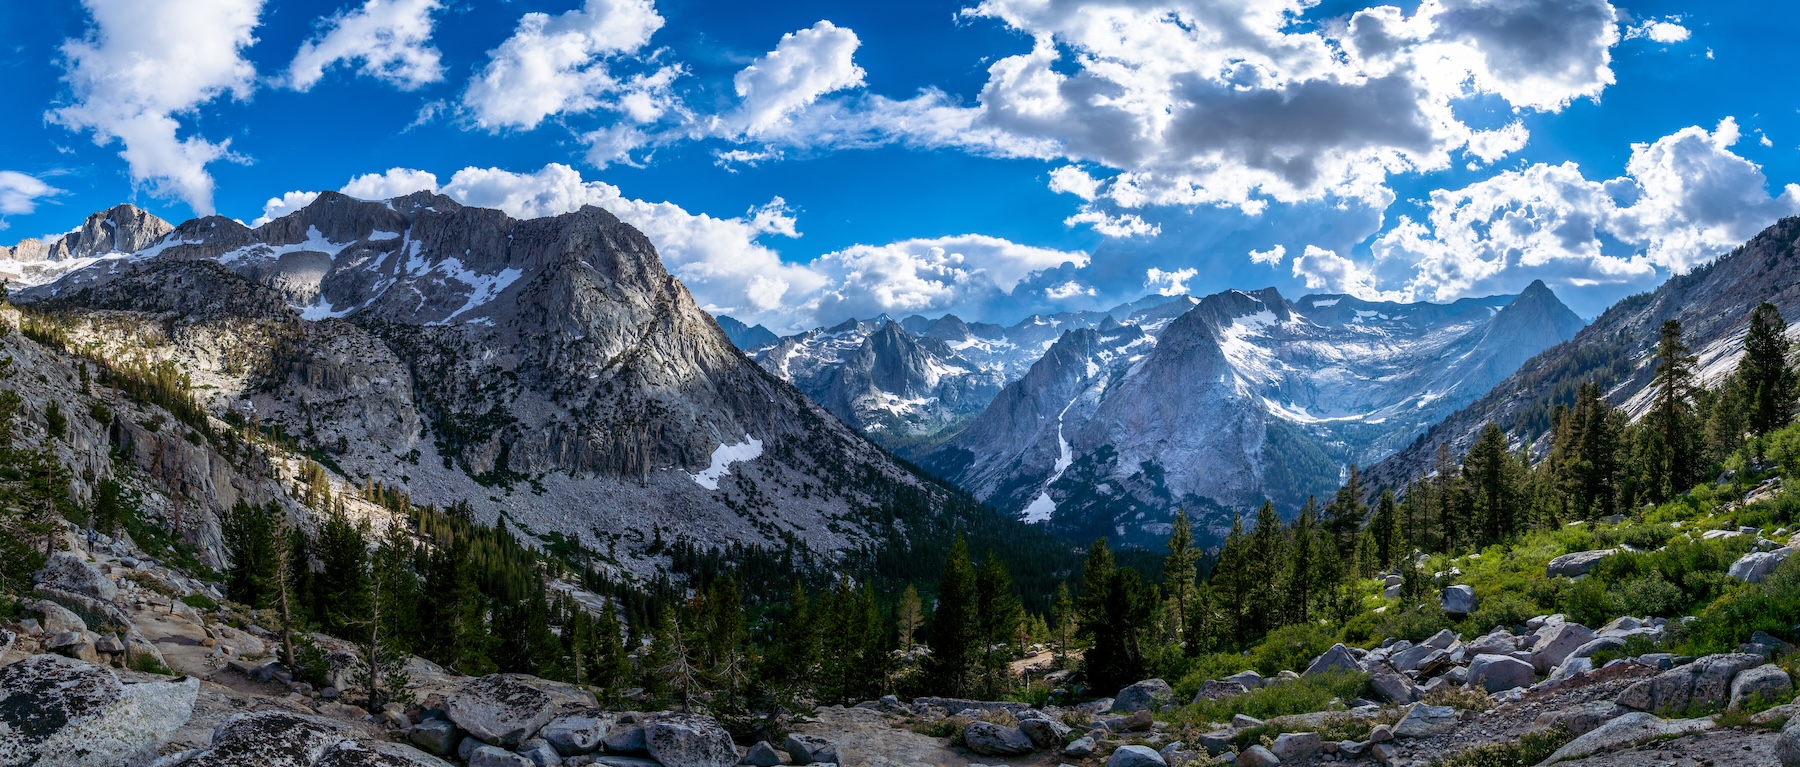 Dramatic clouds over Kings Canyon National Park in the Sierras. Photo by Brock Dallman